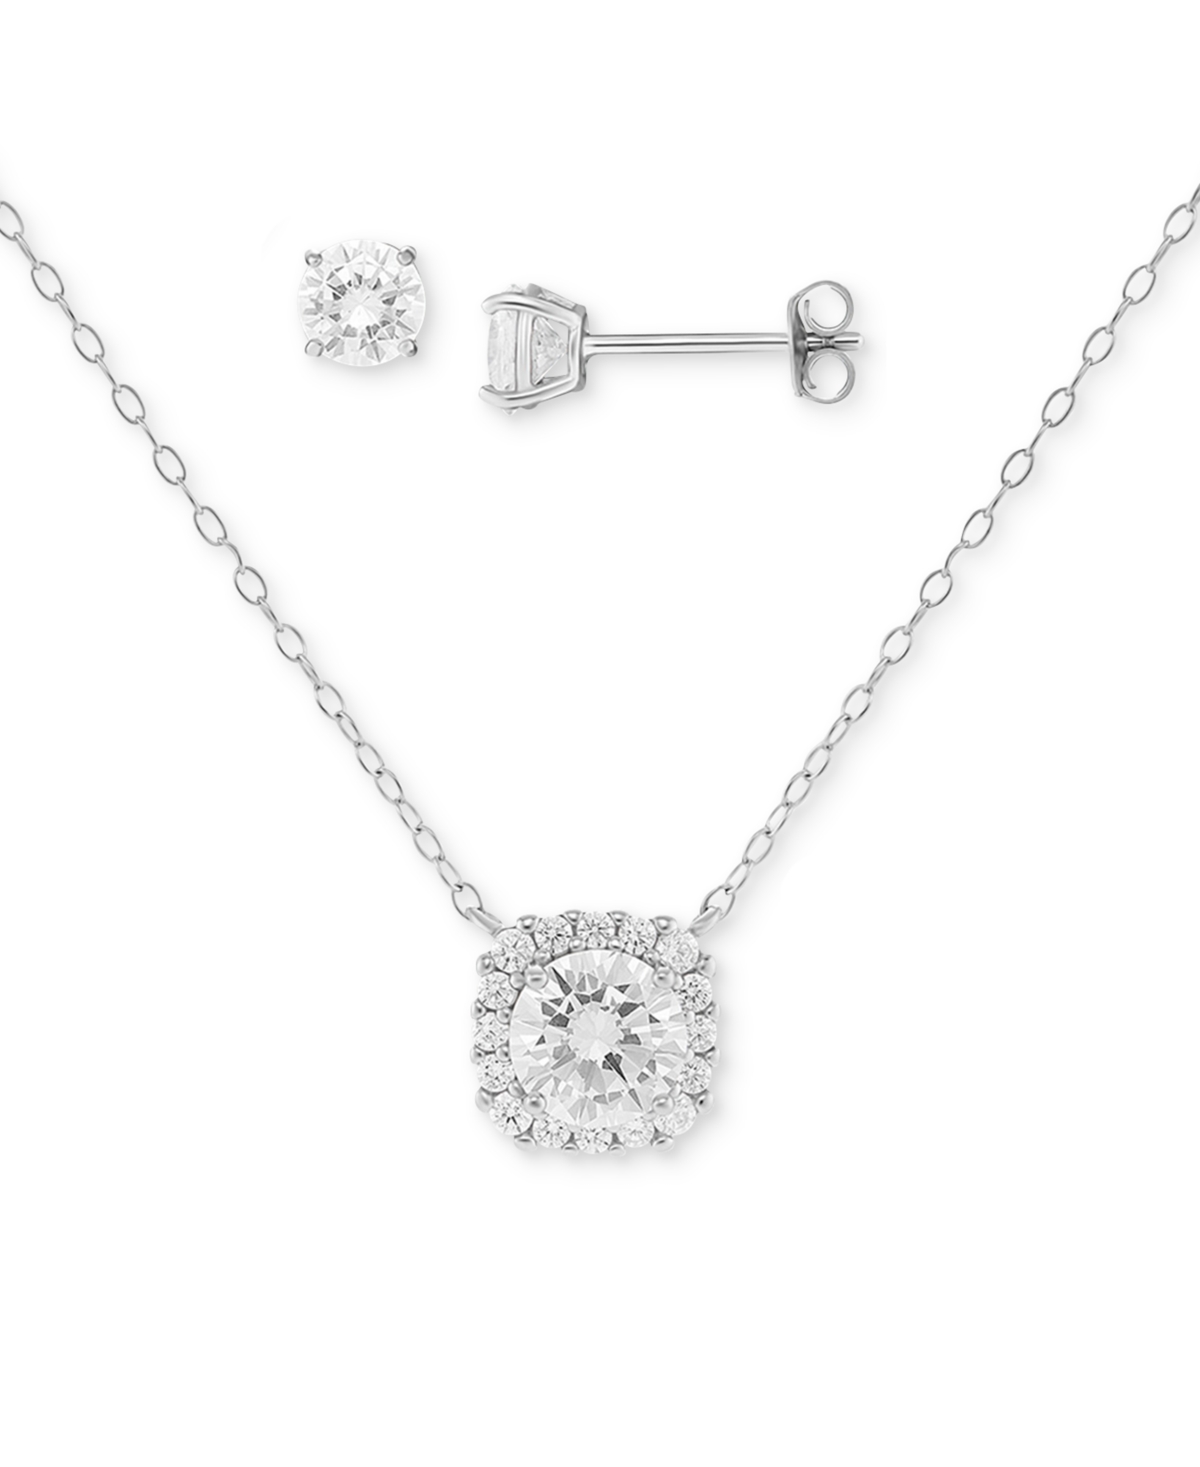 Giani Bernini 2-pc. Set Cubic Zirconia Halo Pendant Necklace & Solitaire Stud Earrings In Sterling Silver, Created